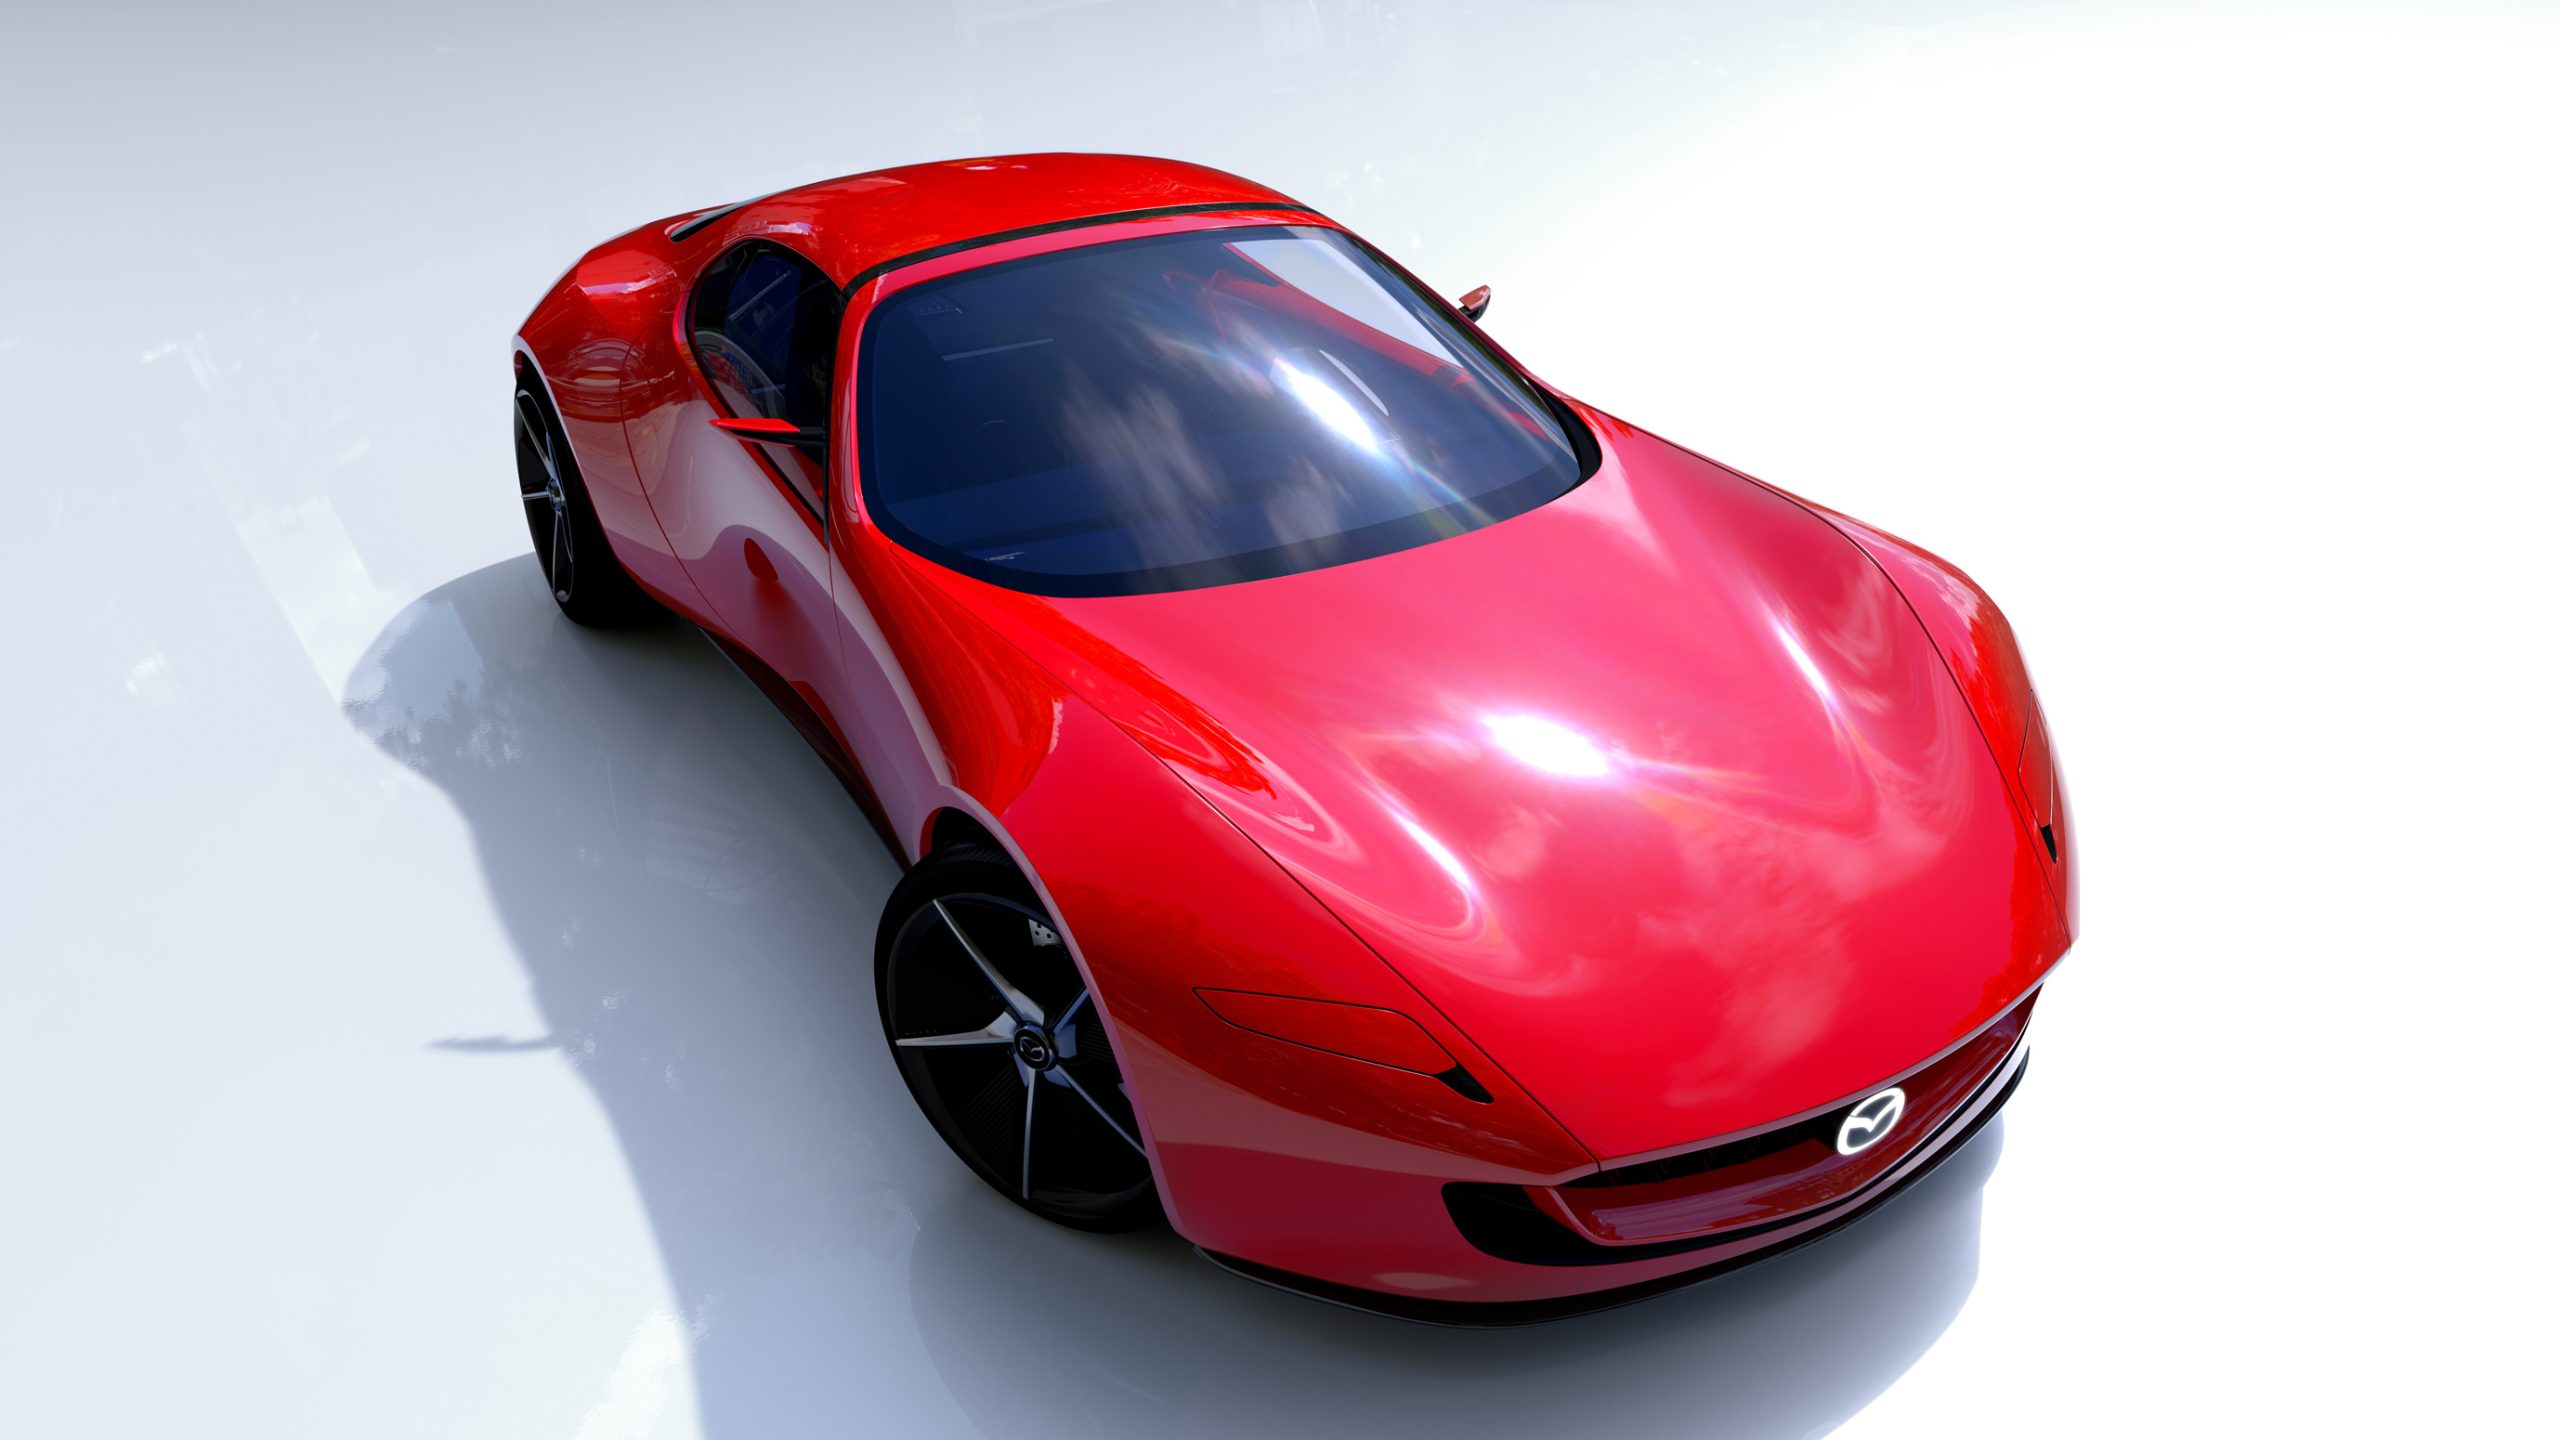 Mazda unveils ‘MAZDA ICONIC SP’ compact sports car concept